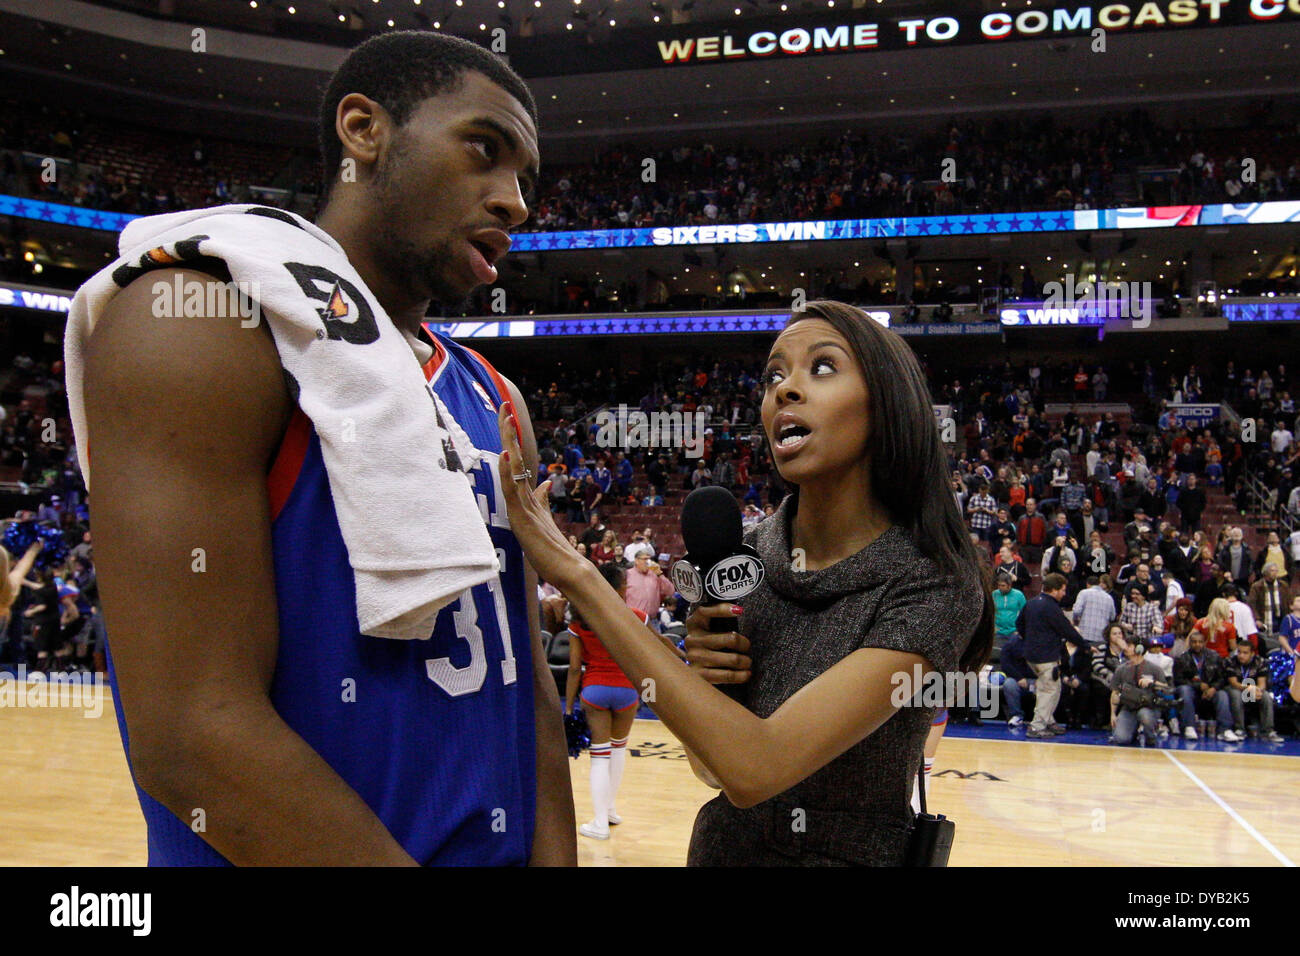 March 29, 2014: Fox Sports reporter Melissa Knowles interviews Stock Photo: 68470393 ...1300 x 956